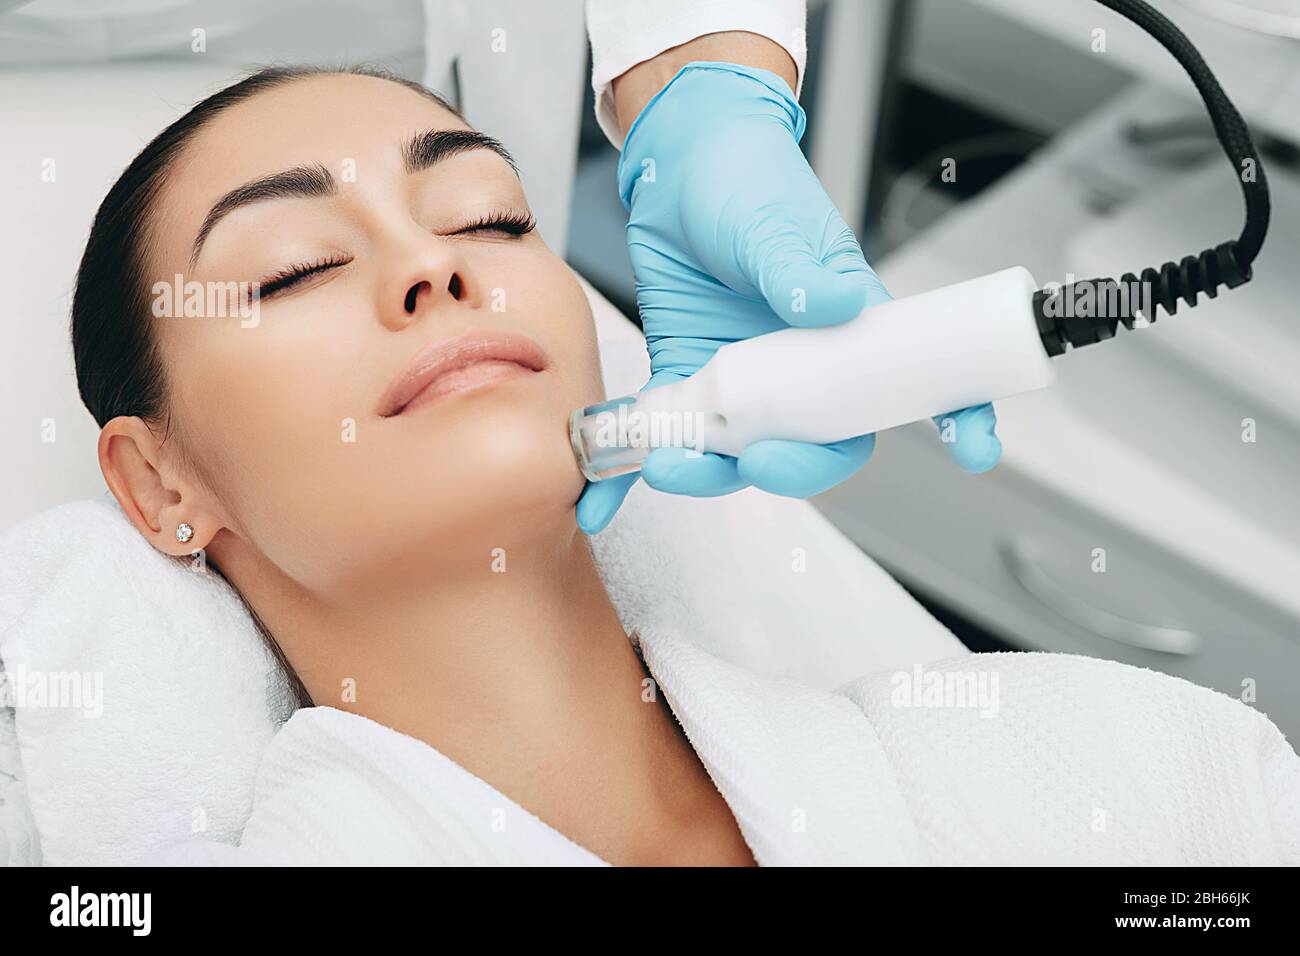 woman receiving no-needle high frequency mesotherapy at beauty salon. non-invasive procedure for skin rejuvenation Stock Photo